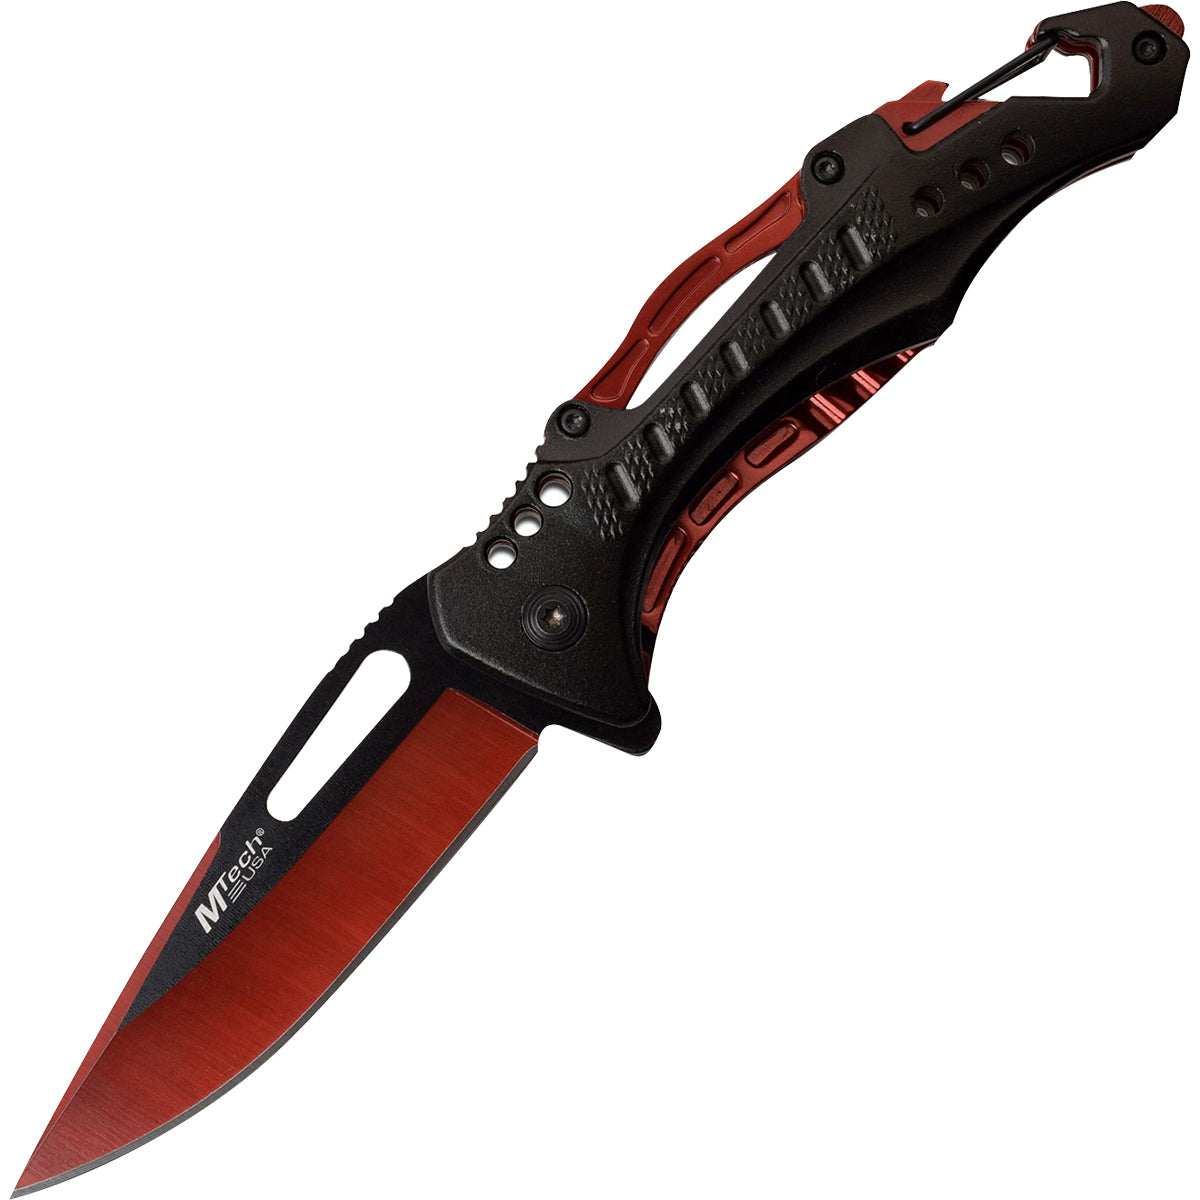 MTech USA Linerlock Spring Assisted Folding Knife, 3.5" Red Blade, MT-A705G2RD M-Tech